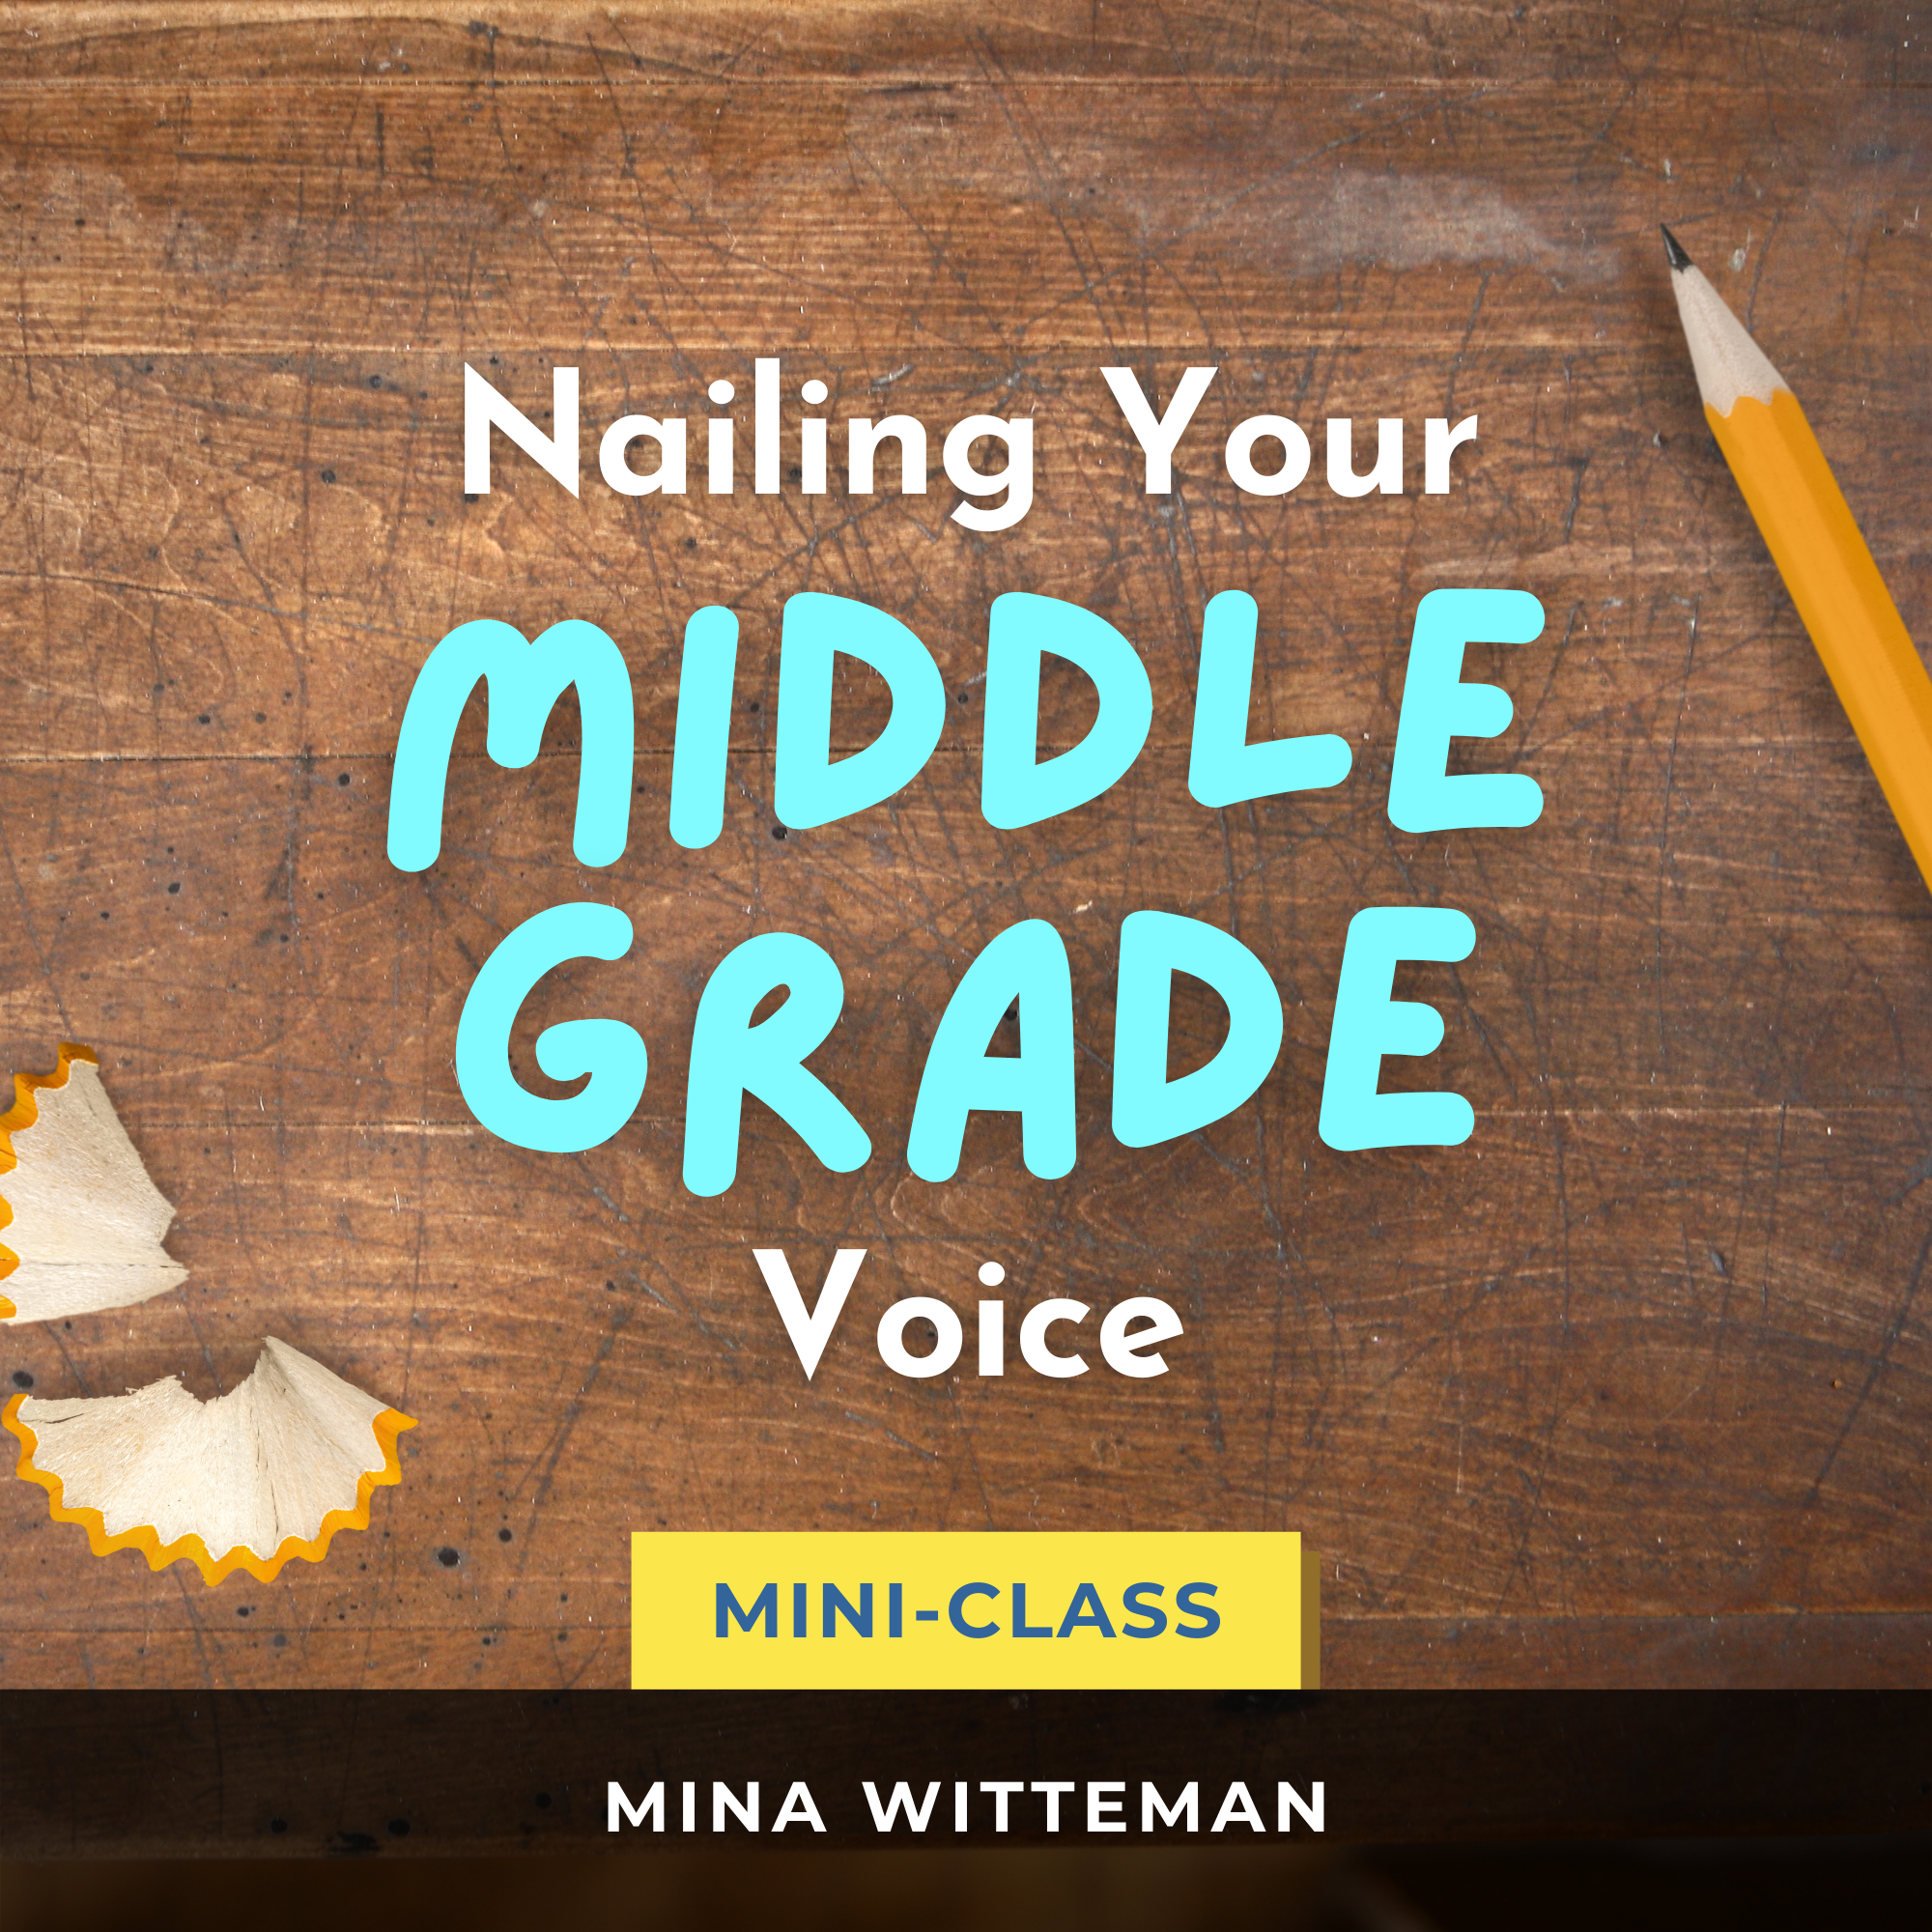 Nailing Your Middle Grade Voice